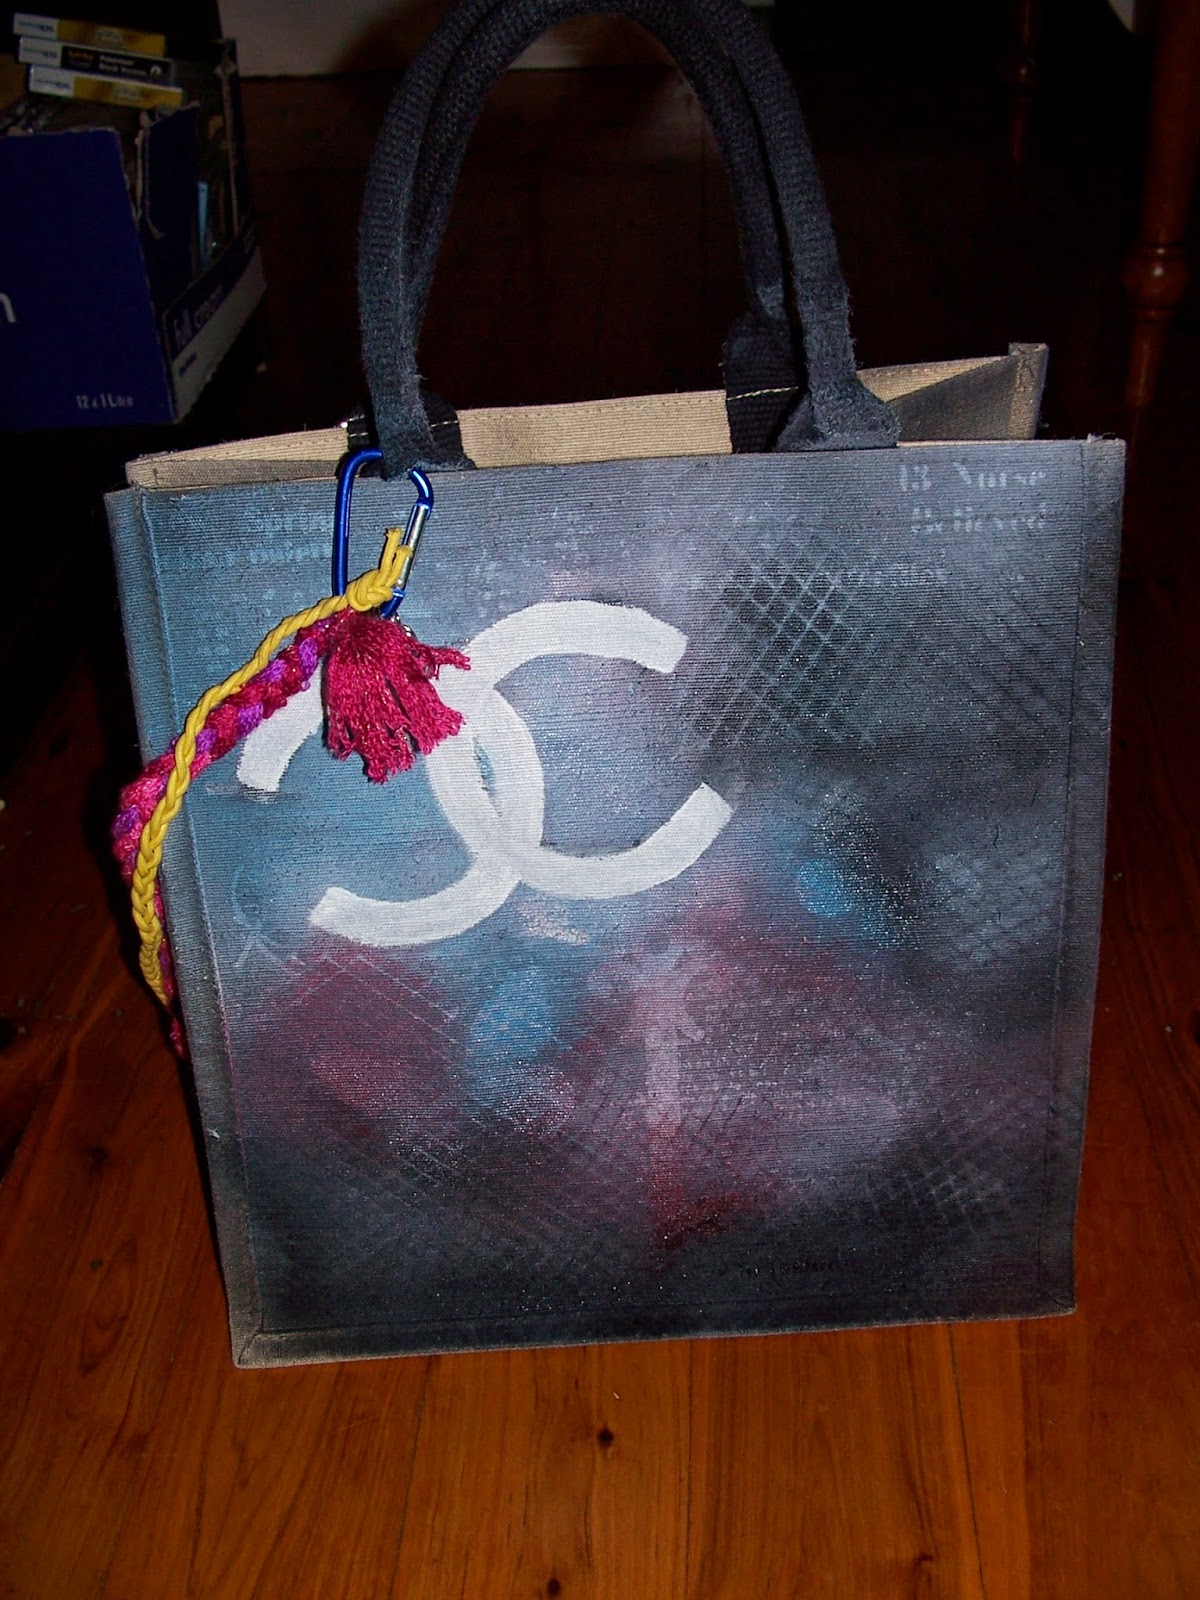 Chanel Spray paint bag: My Diy Chanel Inspired Spray Paint Tote